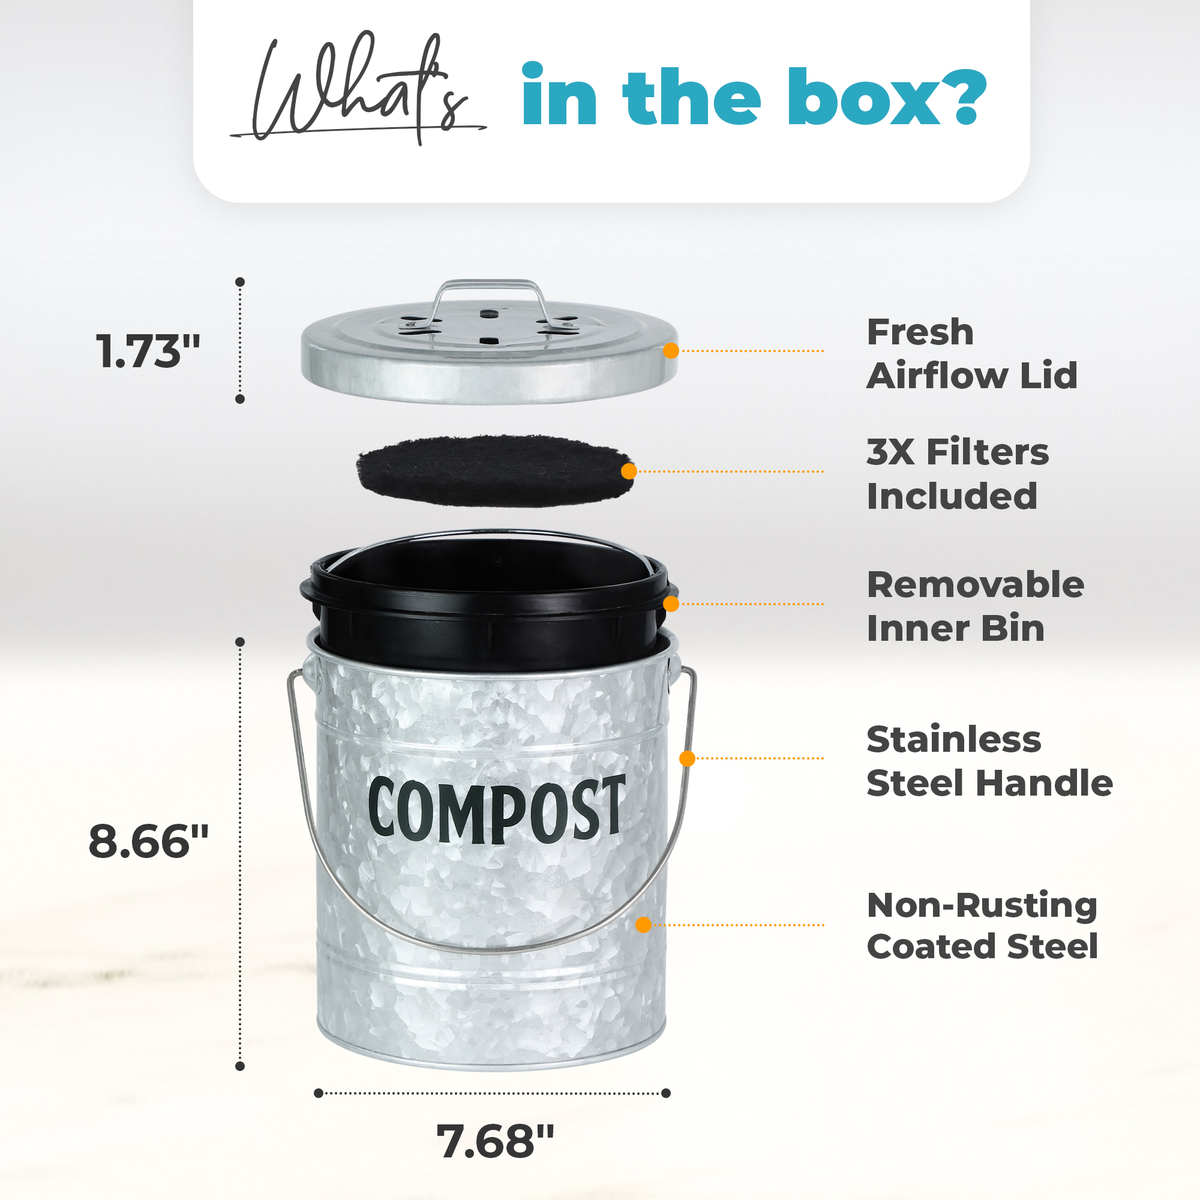 Galvanized compost bin package inclusions, features and dimensions